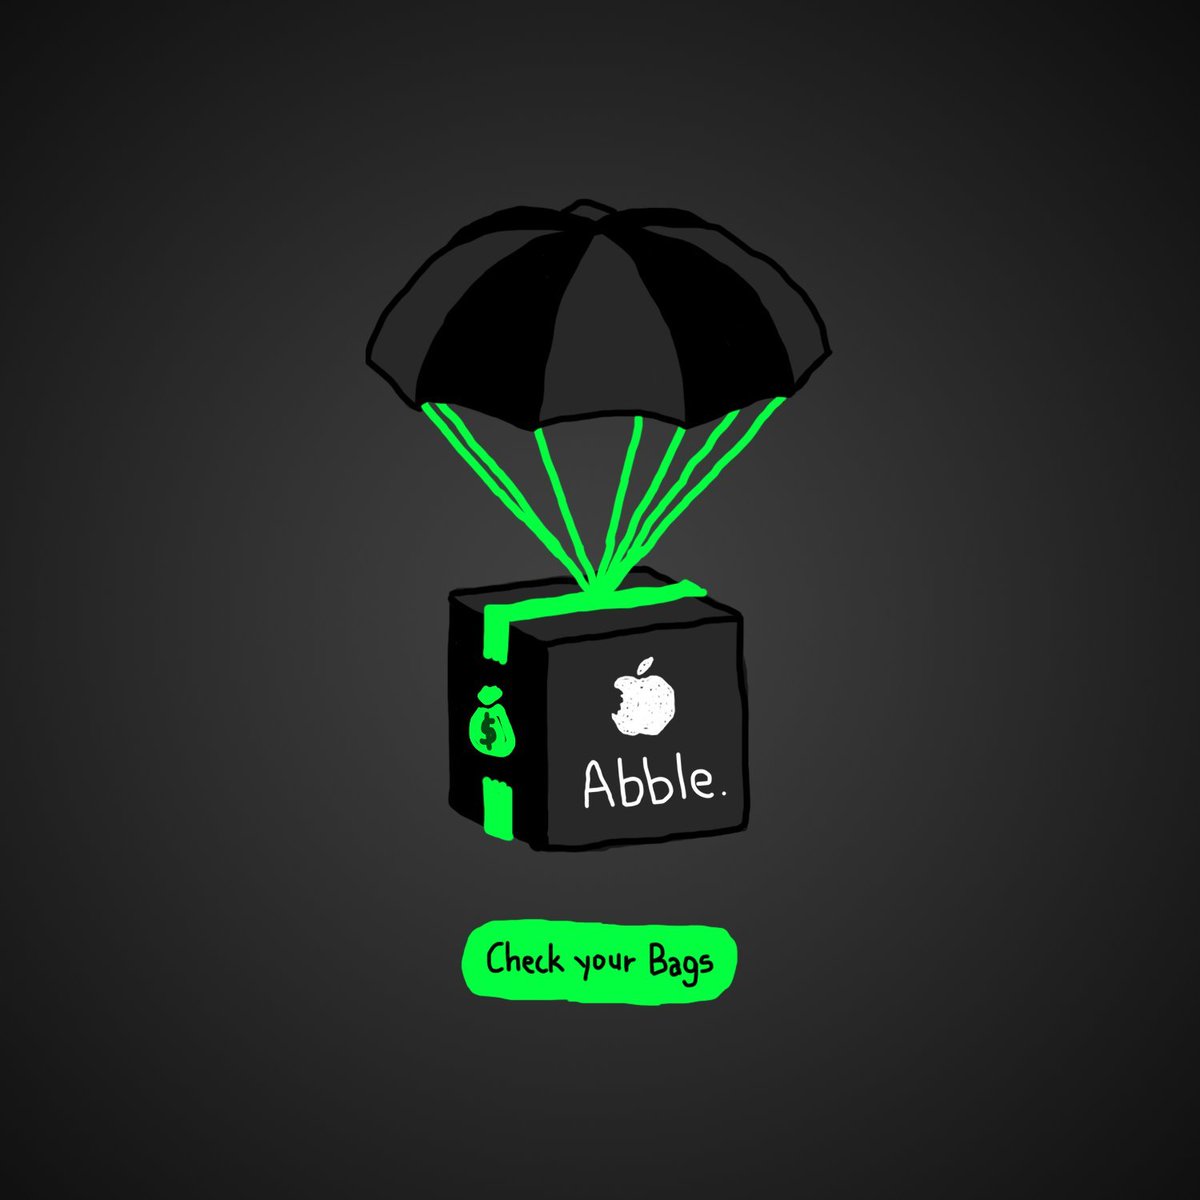 Get ready to check your Bags 💰 For the next 24 hours, we're dropping $AABL to OG Members who share their Bags link below 👇 Follow @abblecoin and RT this to qualify for the drop bags.fm/$AABL